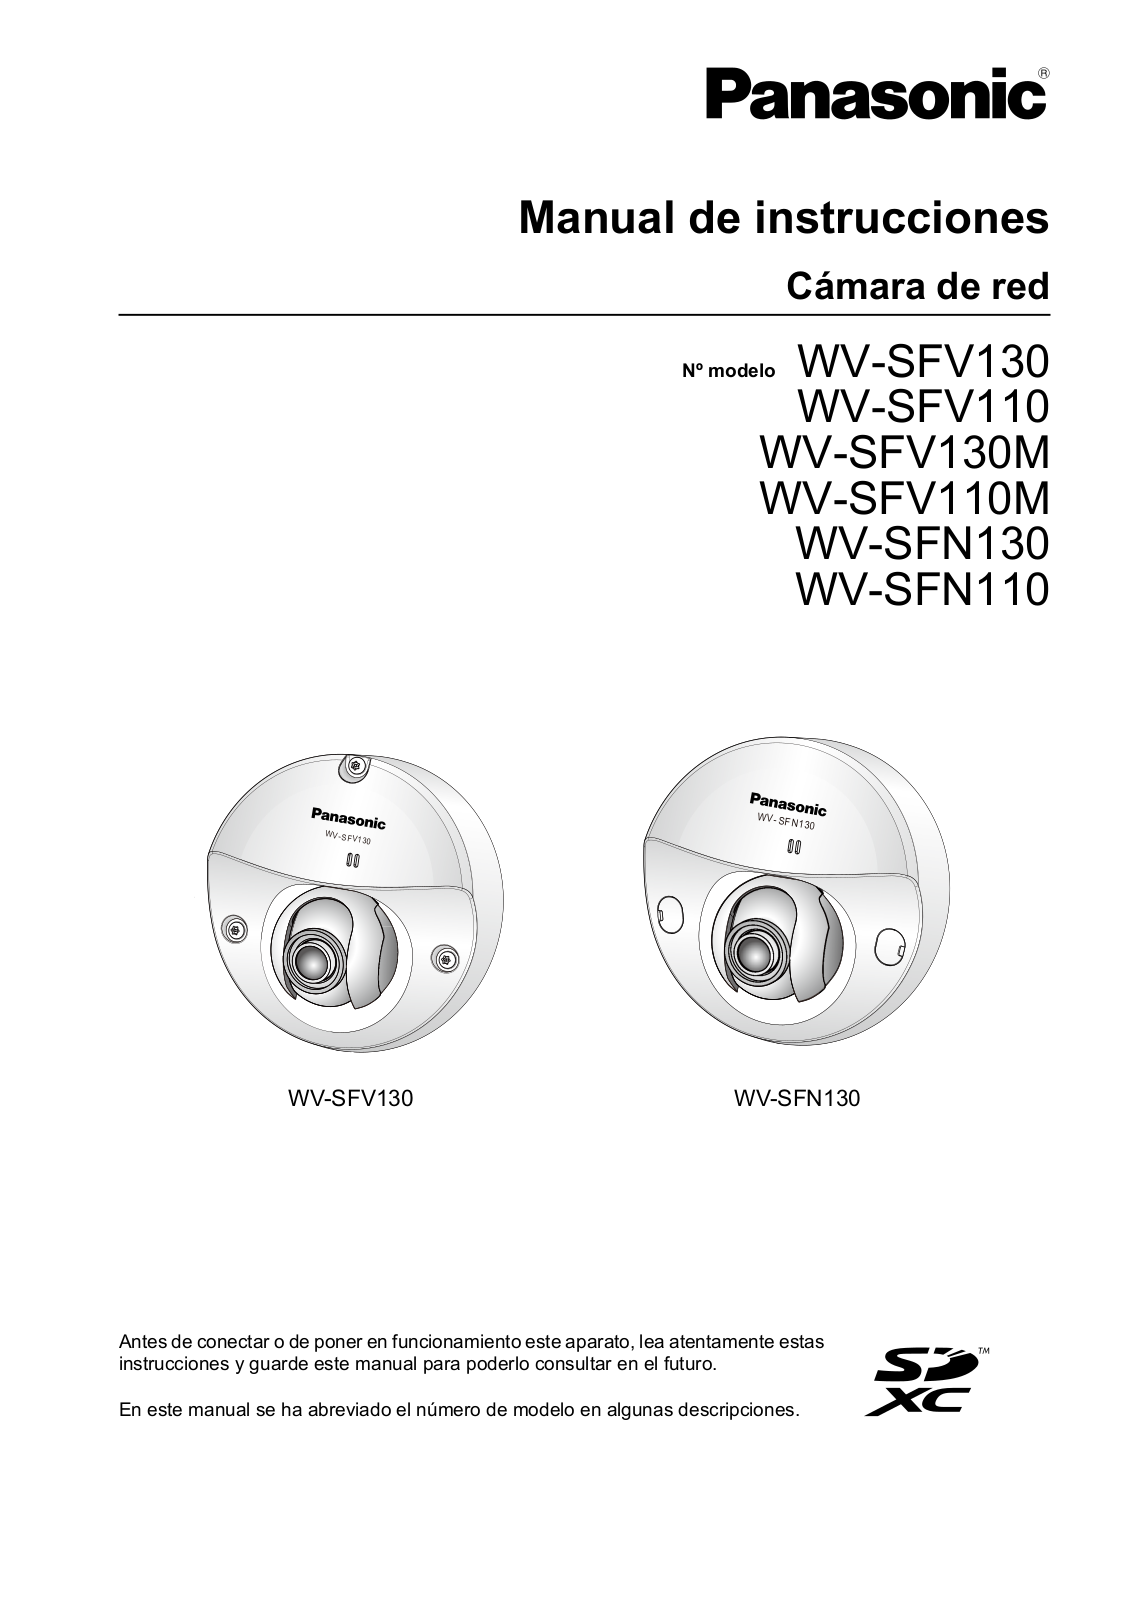 Panasonic WV-SFV130, WV-SFV110, WV-SFV130M, WV-SFV110M, WV-SFN130 Operating Instructions